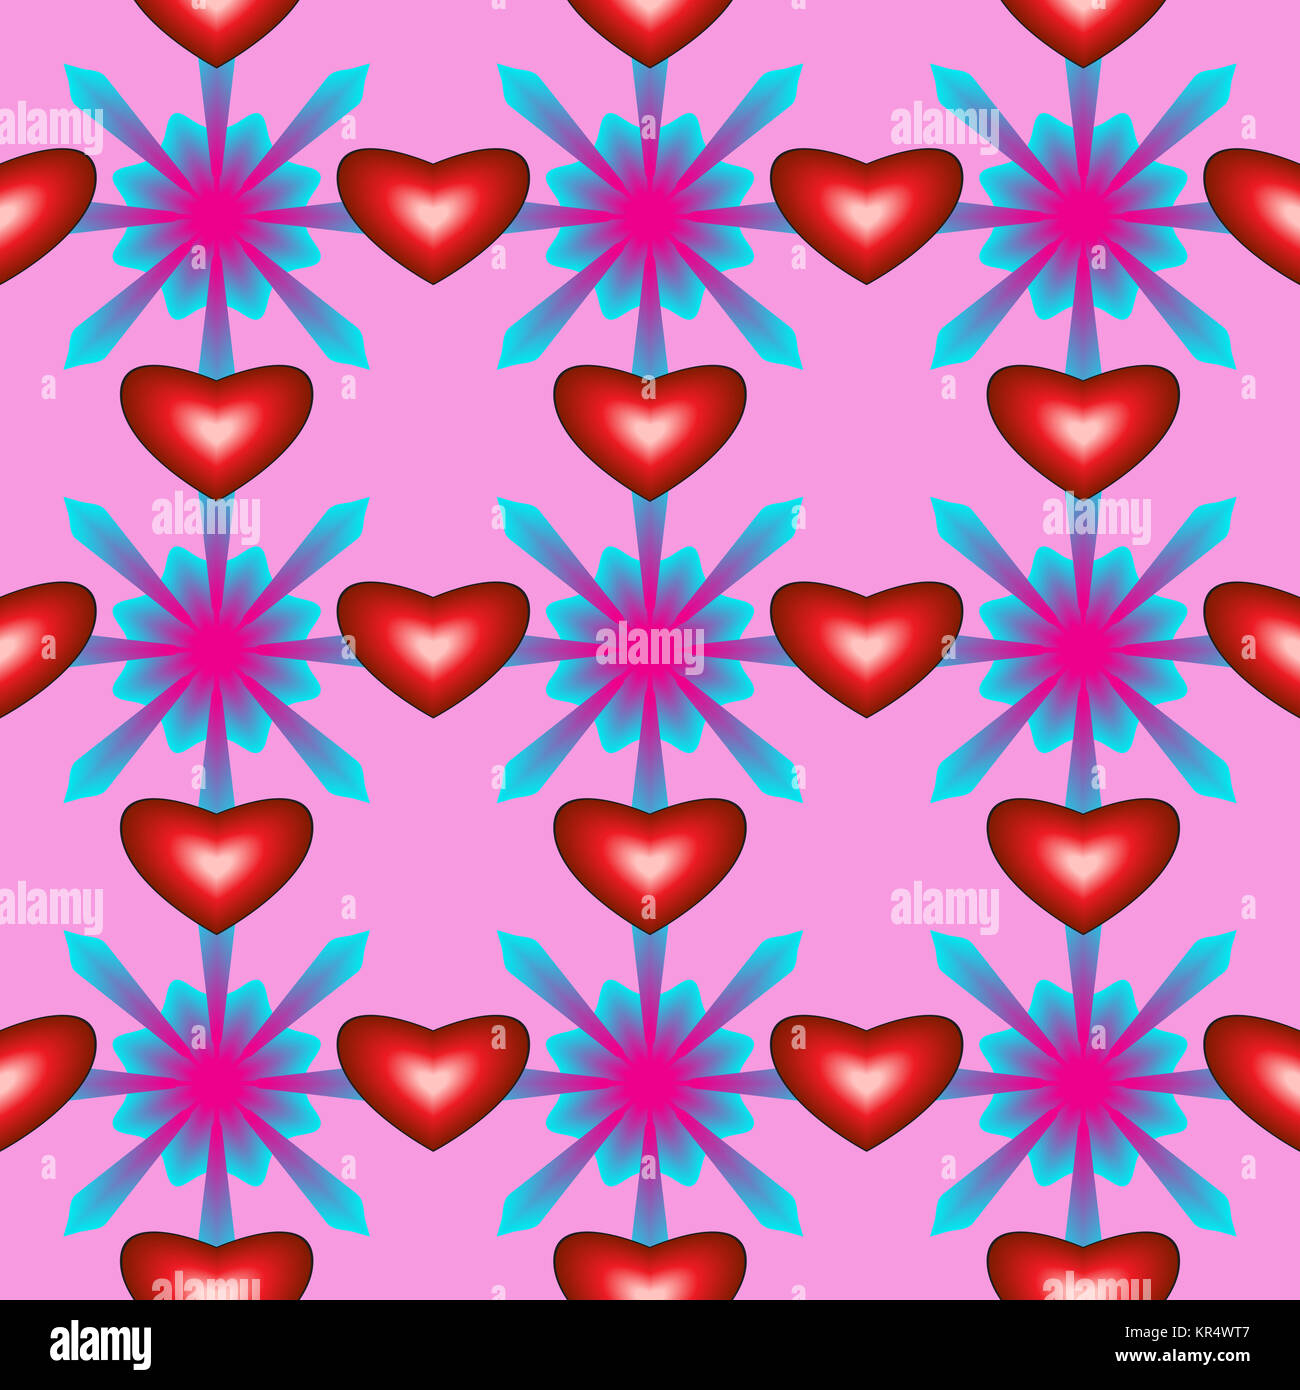 Seamless pattern with hearts and flowers Stock Photo